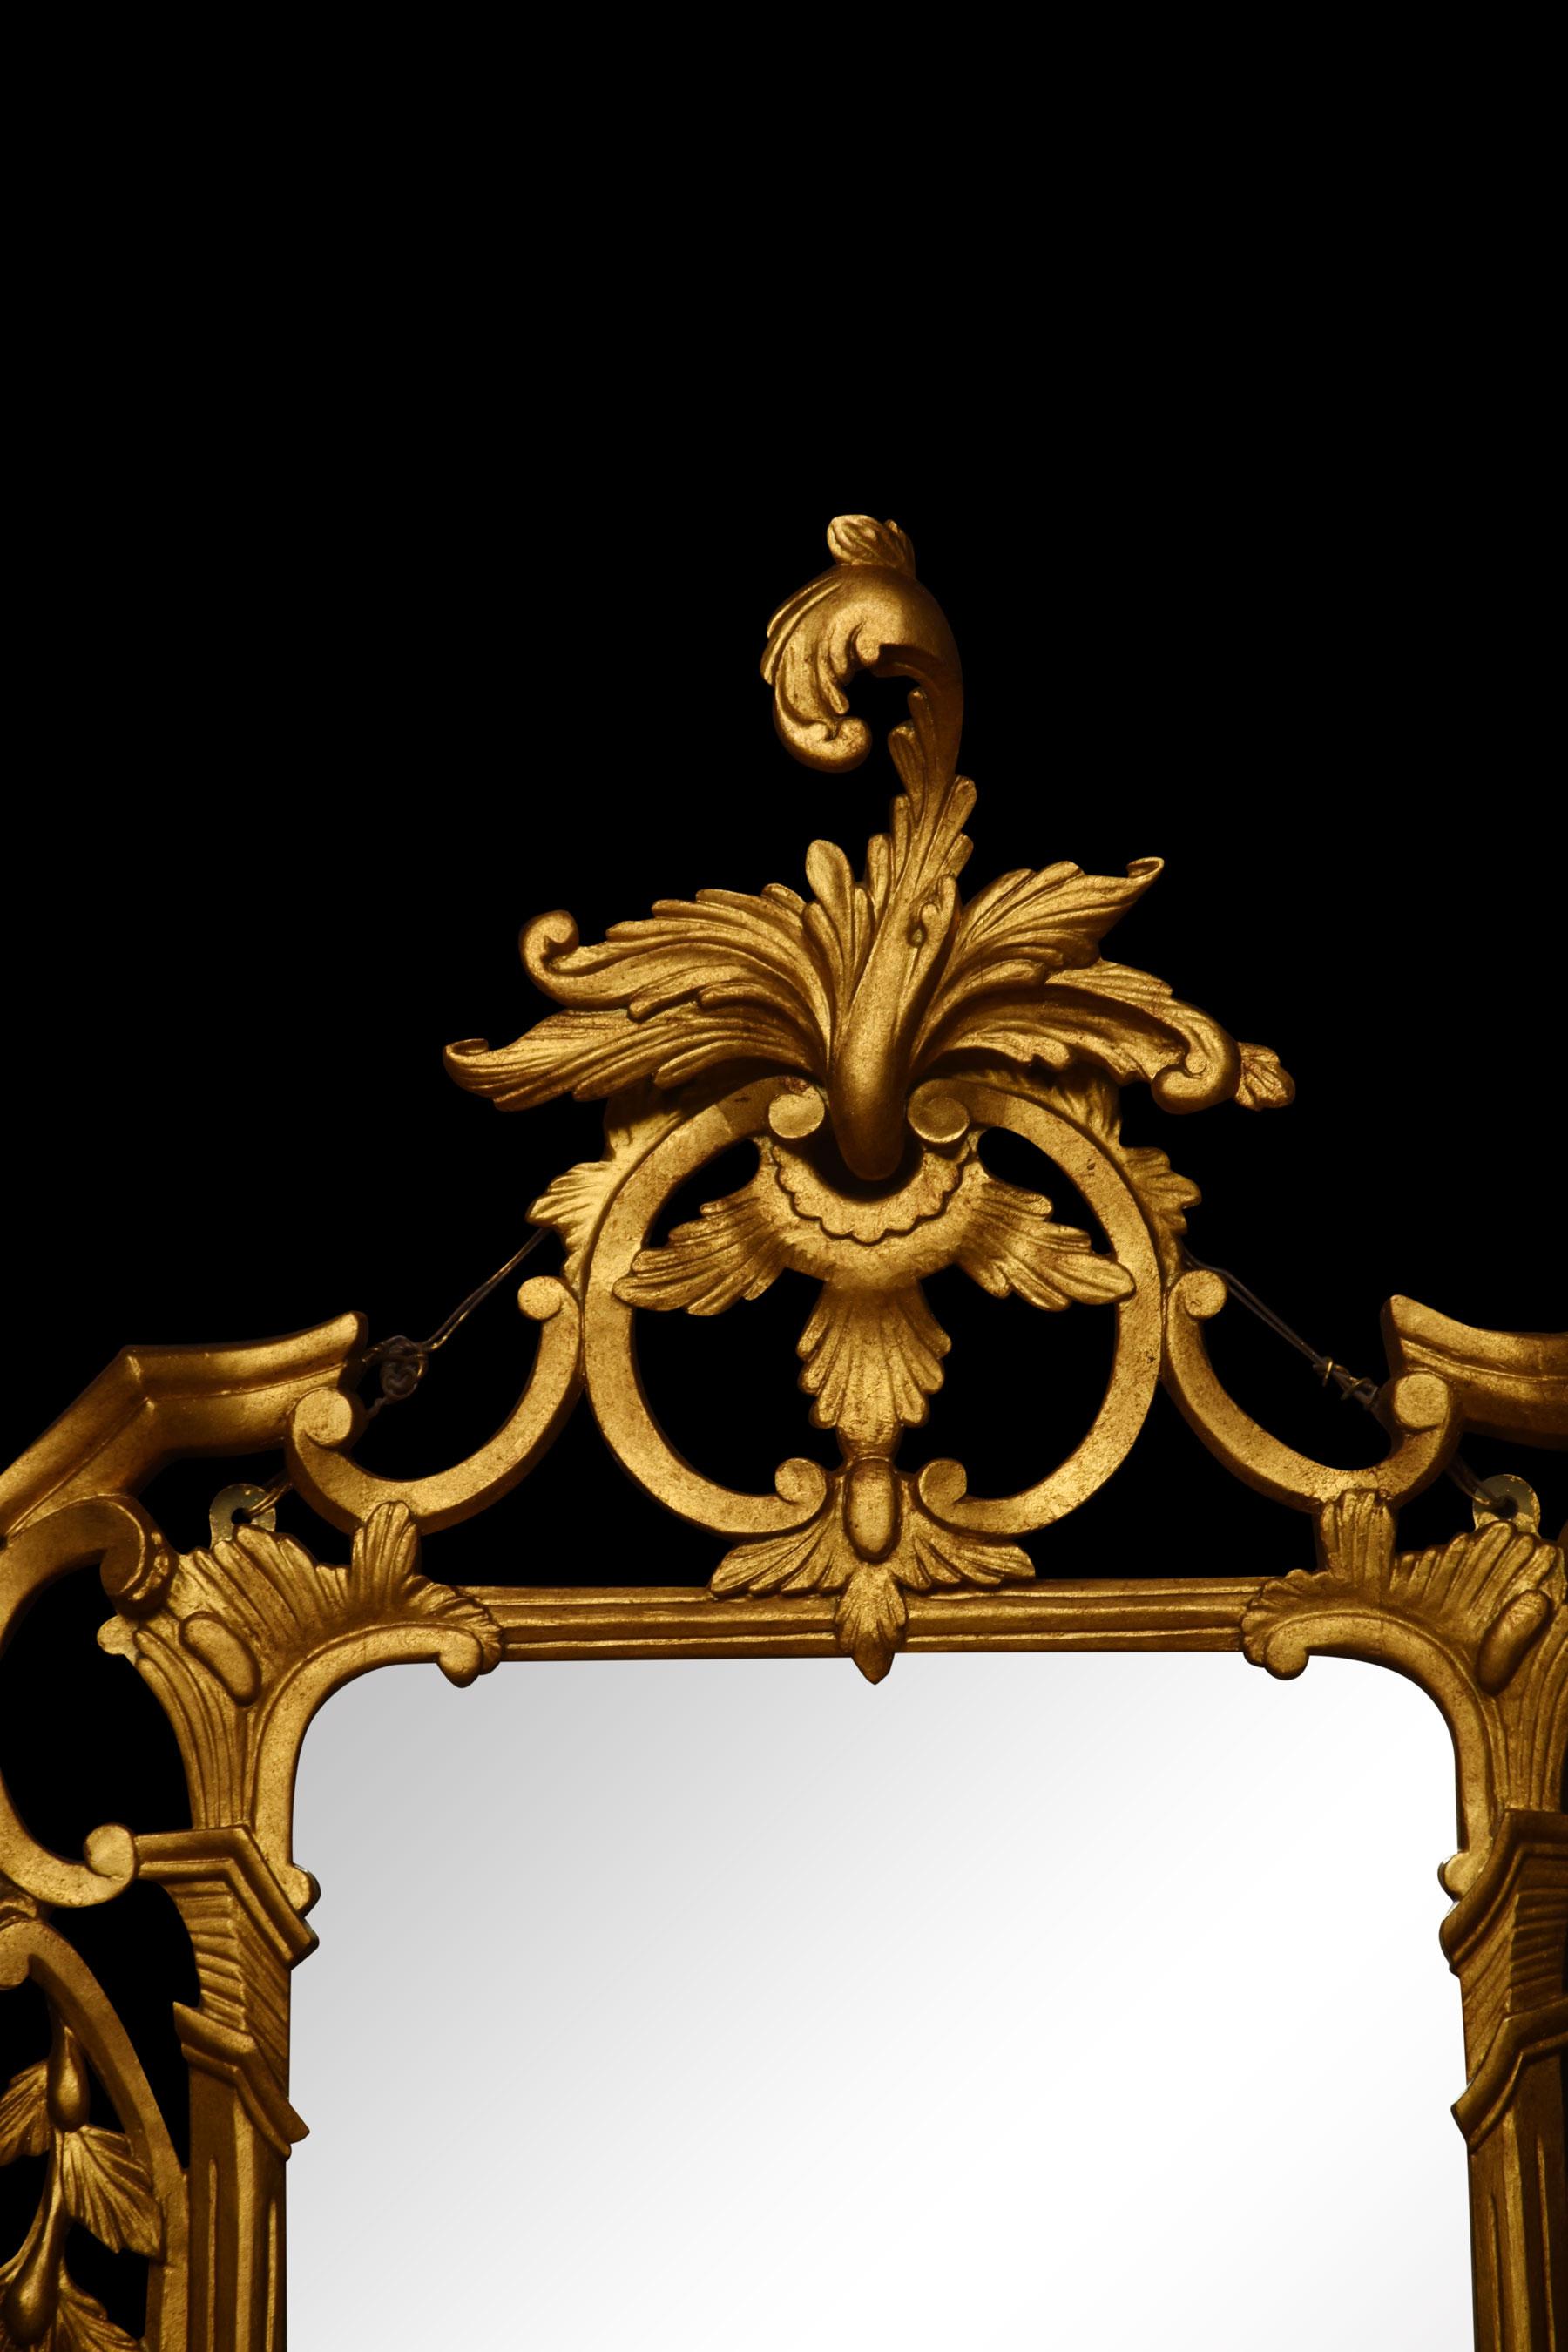 Baroque style giltwood mirror, the original rectangular mirror plate surrounded by a carved and pierced frame with rocaille work and scrolls, surmounted by scrolling acanthus leaves.
Dimensions
Height 44 Inches
Width 22 Inches
Depth 4 Inches.